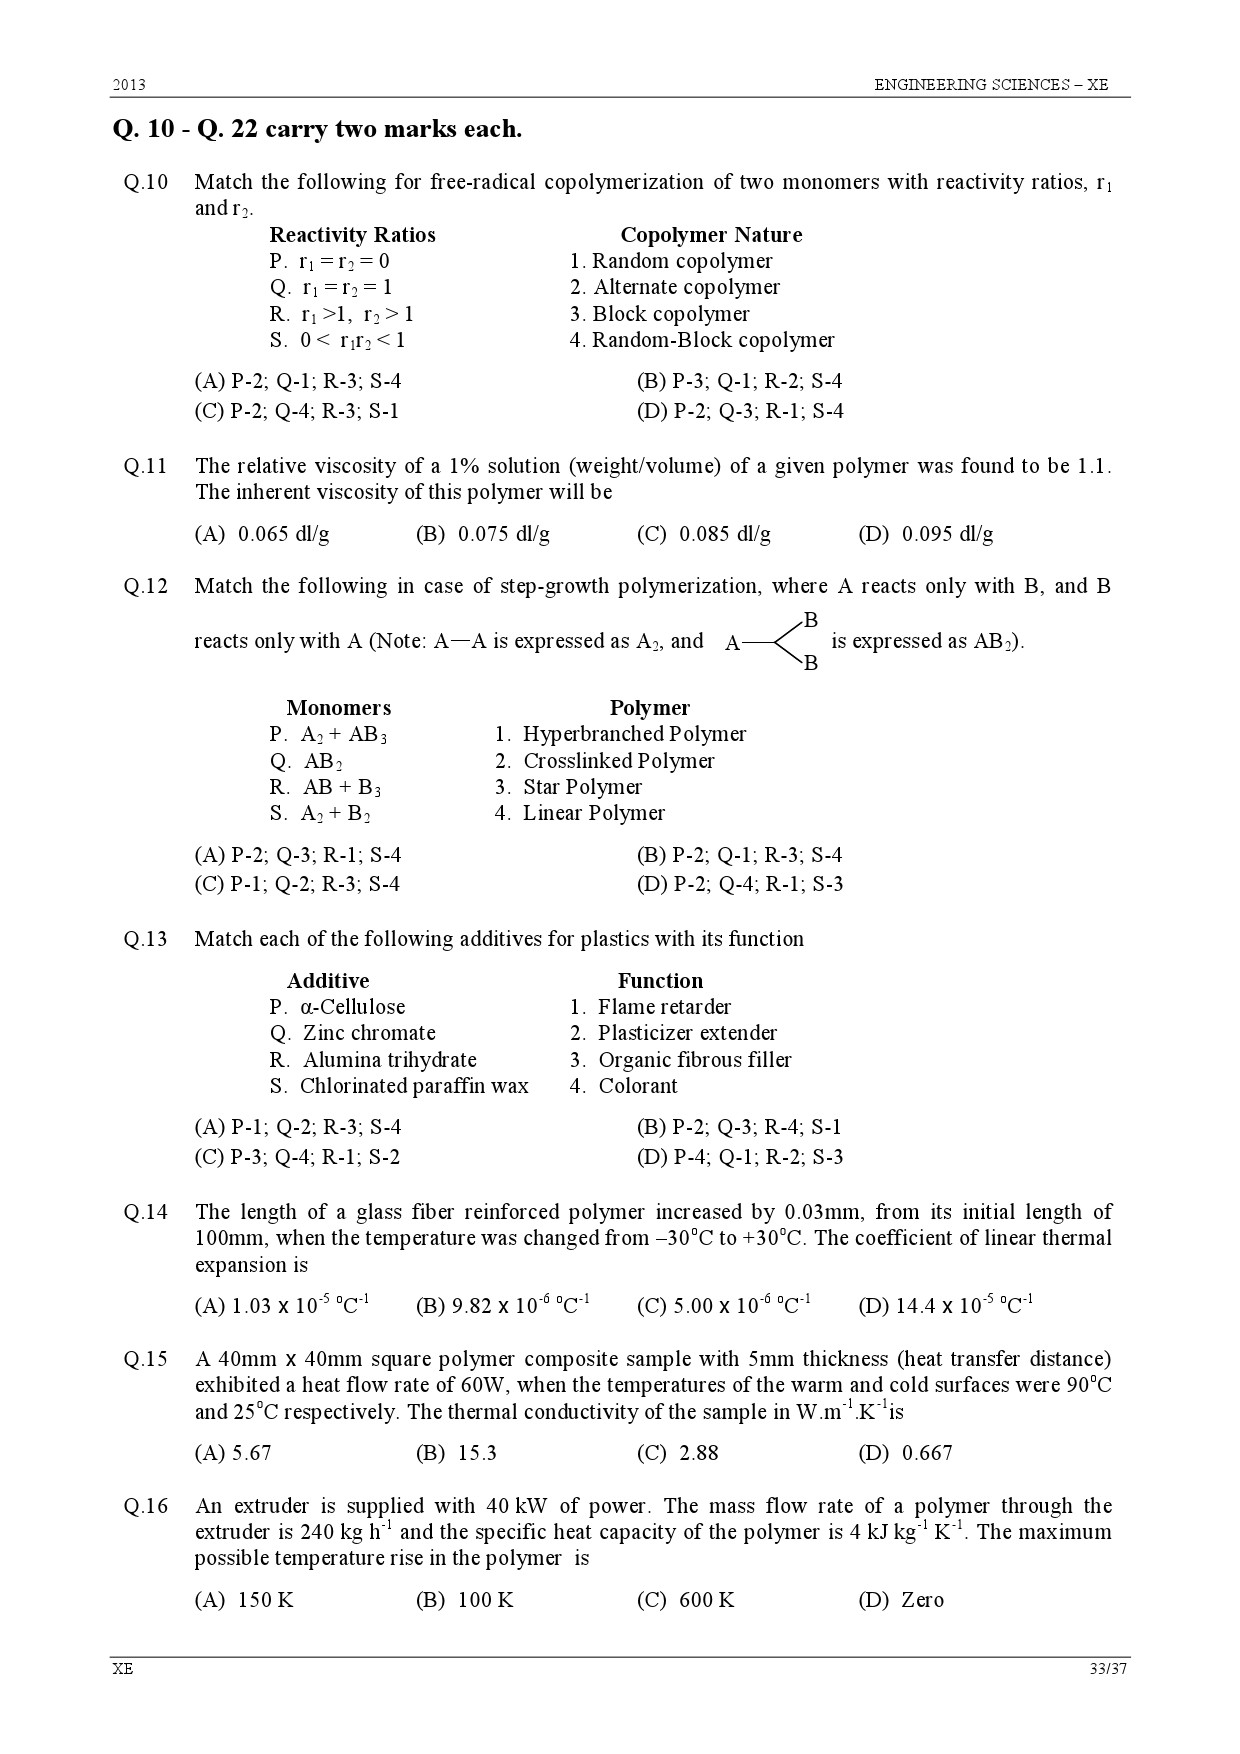 GATE Exam Question Paper 2013 Engineering Sciences 33